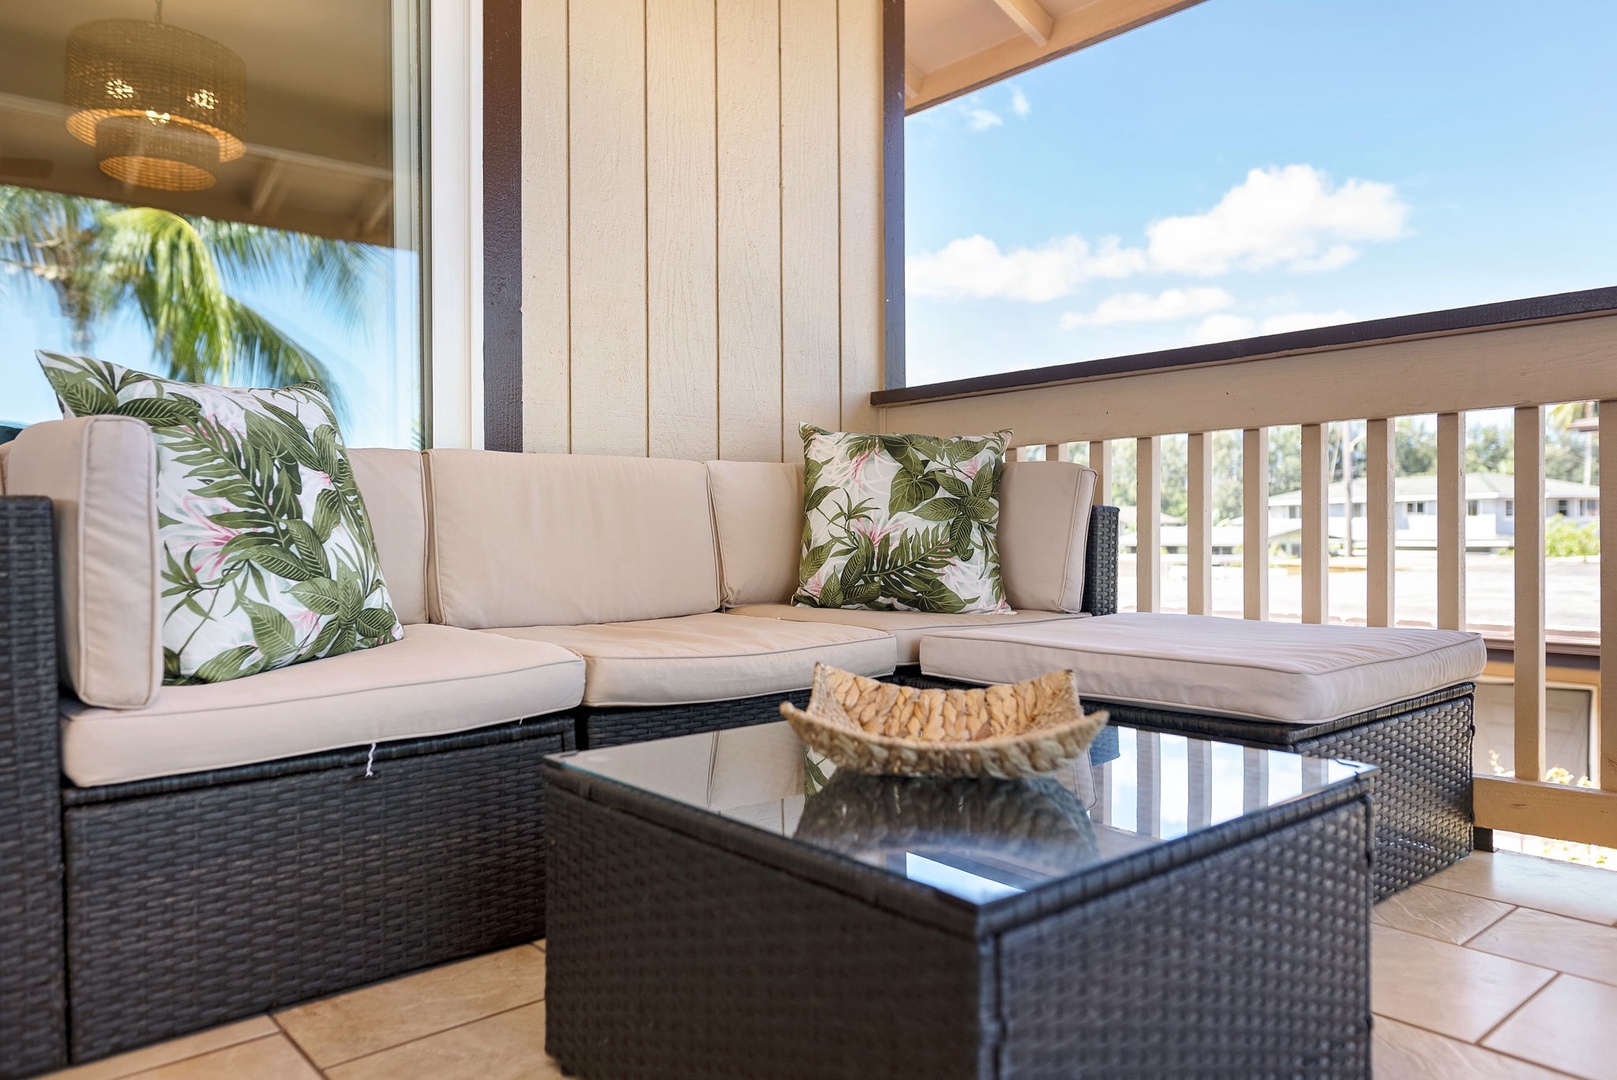 Haleiwa Vacation Rentals, Pikai Hale - Take a seat on the outdoor sofa and enjoy the breathtaking views of the ocean